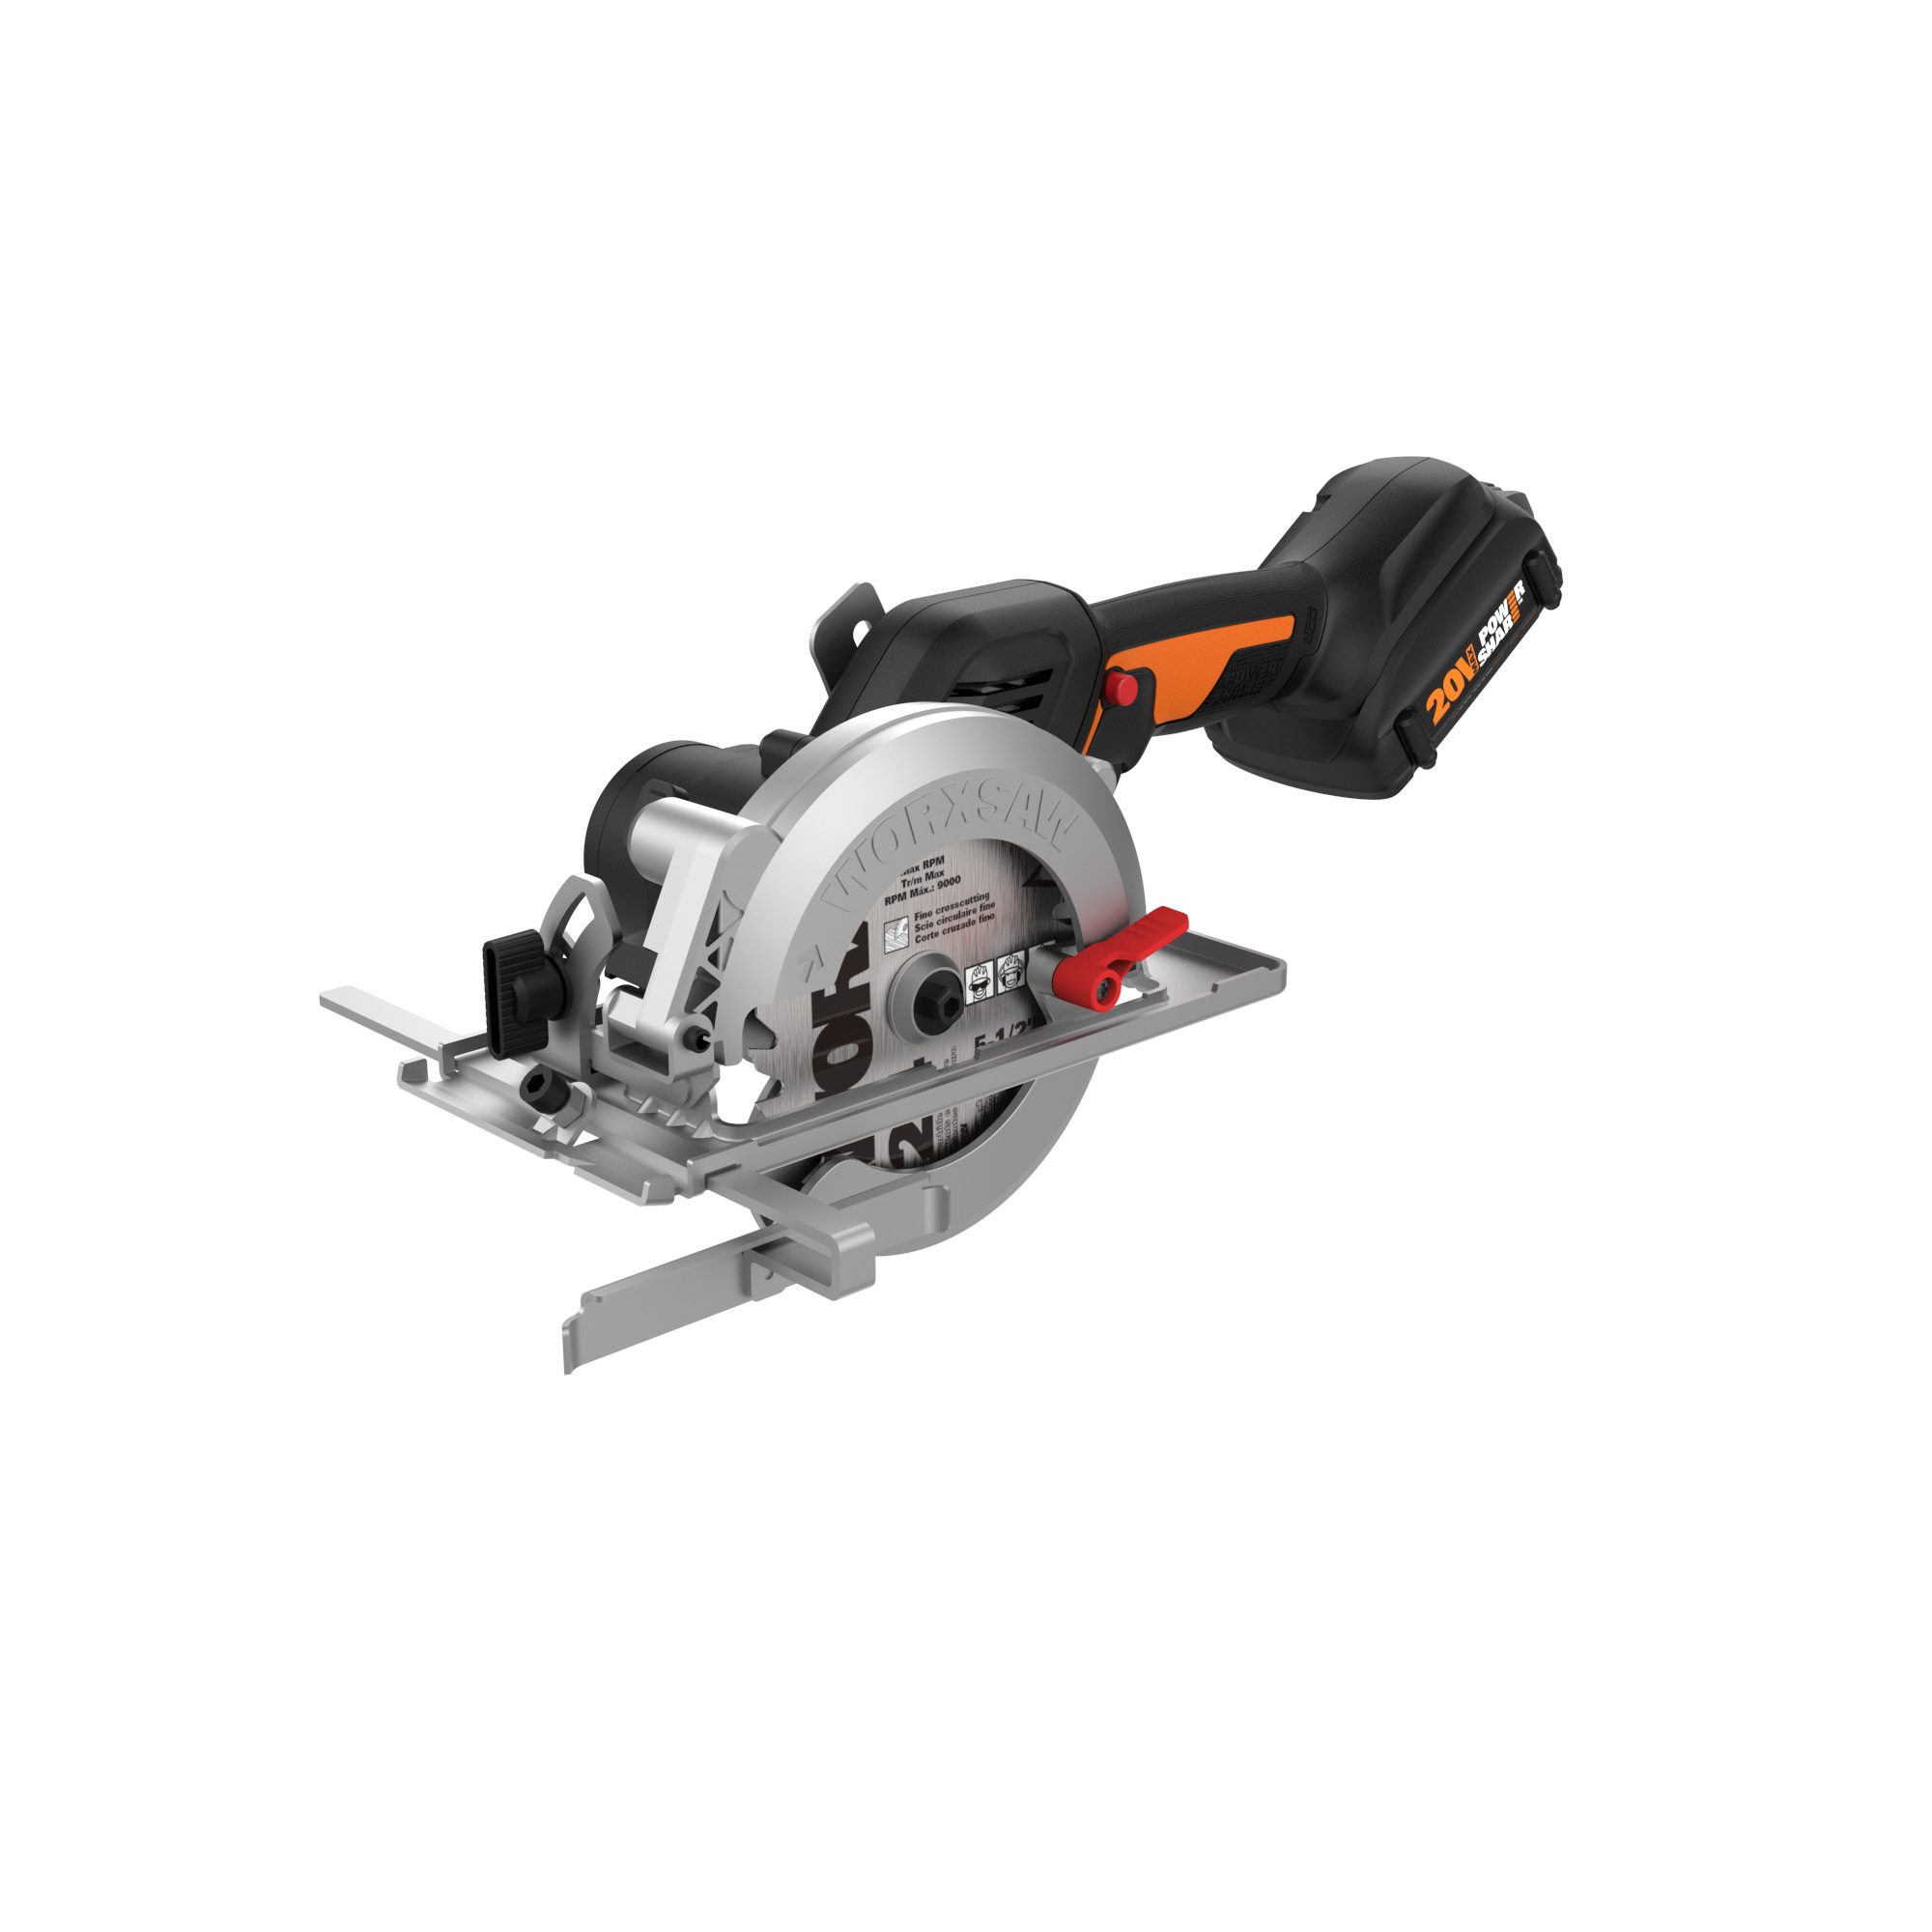 WORX Nitro 20V Power Share 4.5 in. Compact Circular Saw with brushless motor (WX531L)